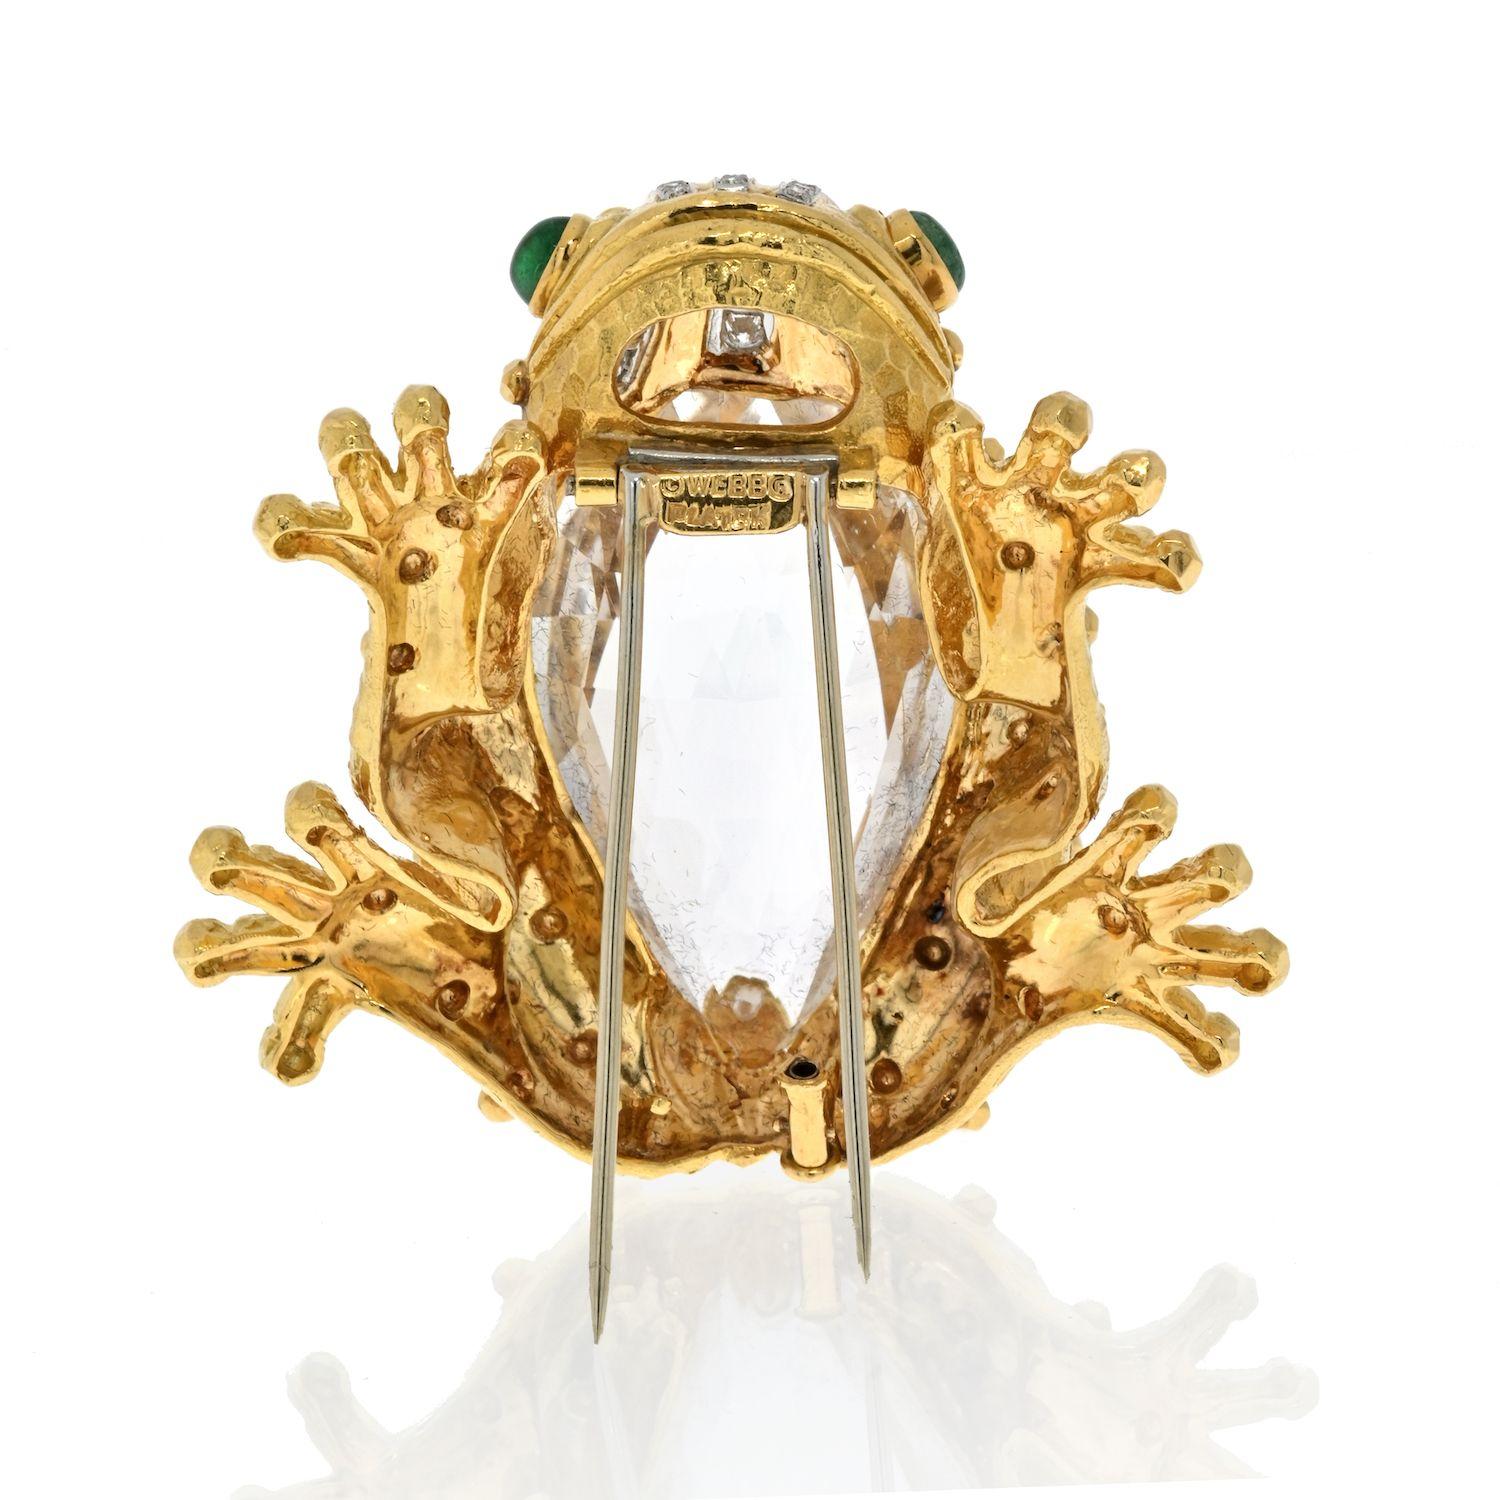 Hammered Gold, Platinum, Rock Crystal, Diamond and Cabochon Emerald Frog Clip-Brooch by David Webb. This beautiful creature is created in 18 kt. gold, the stylized hammered gold frog accented by gold balls, centering one pear-shaped rose-cut rock